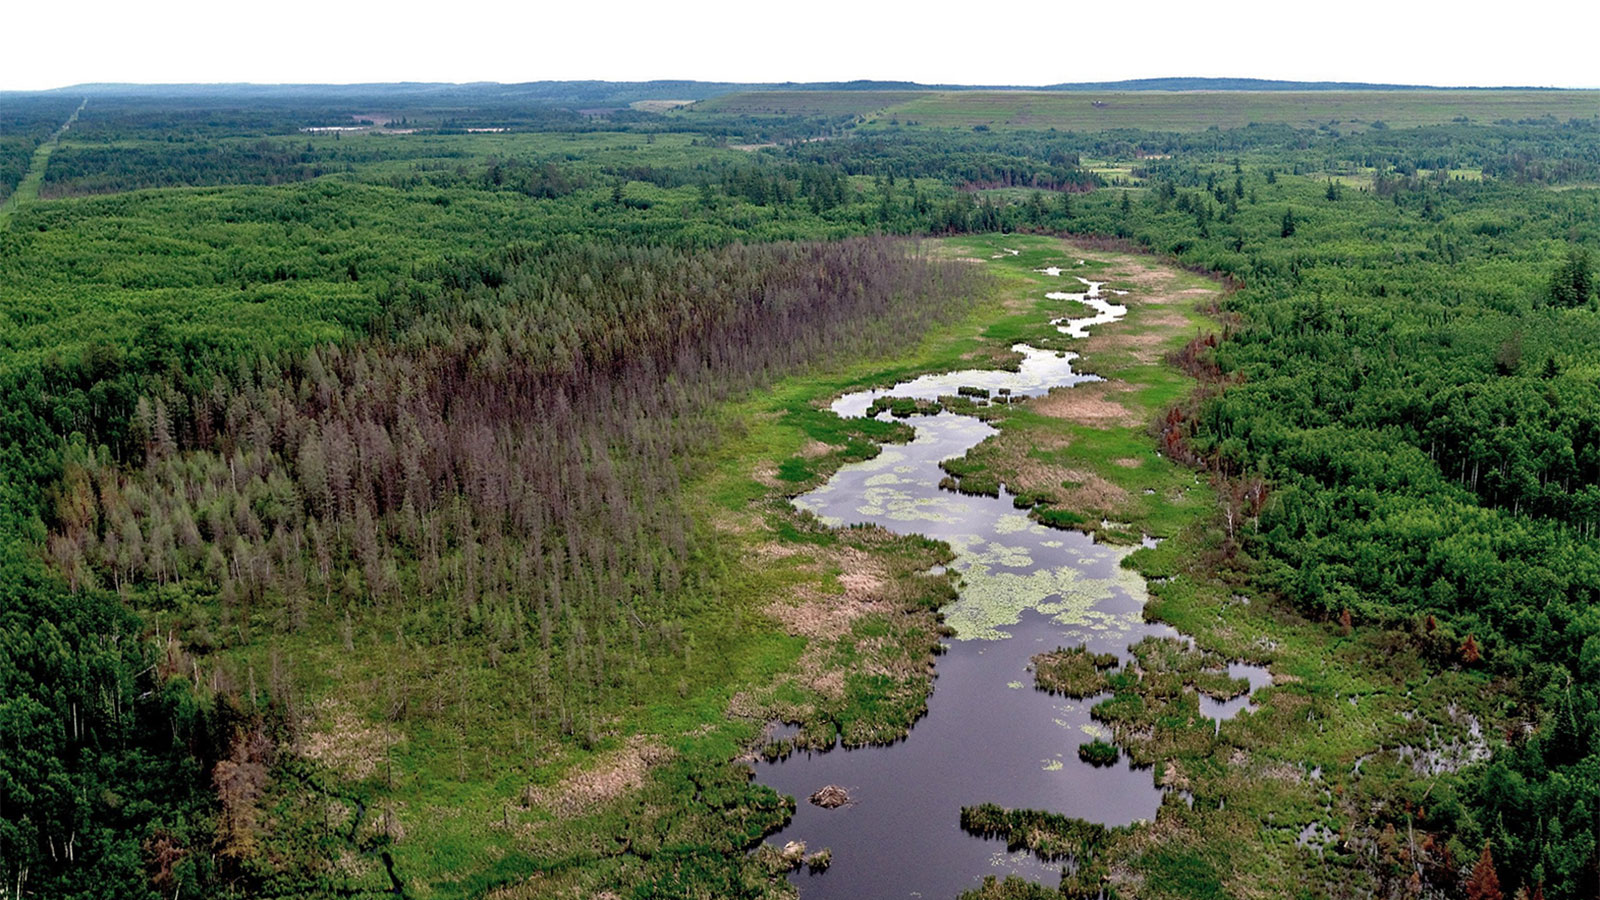 Aerial view of forest, wetlands, and river